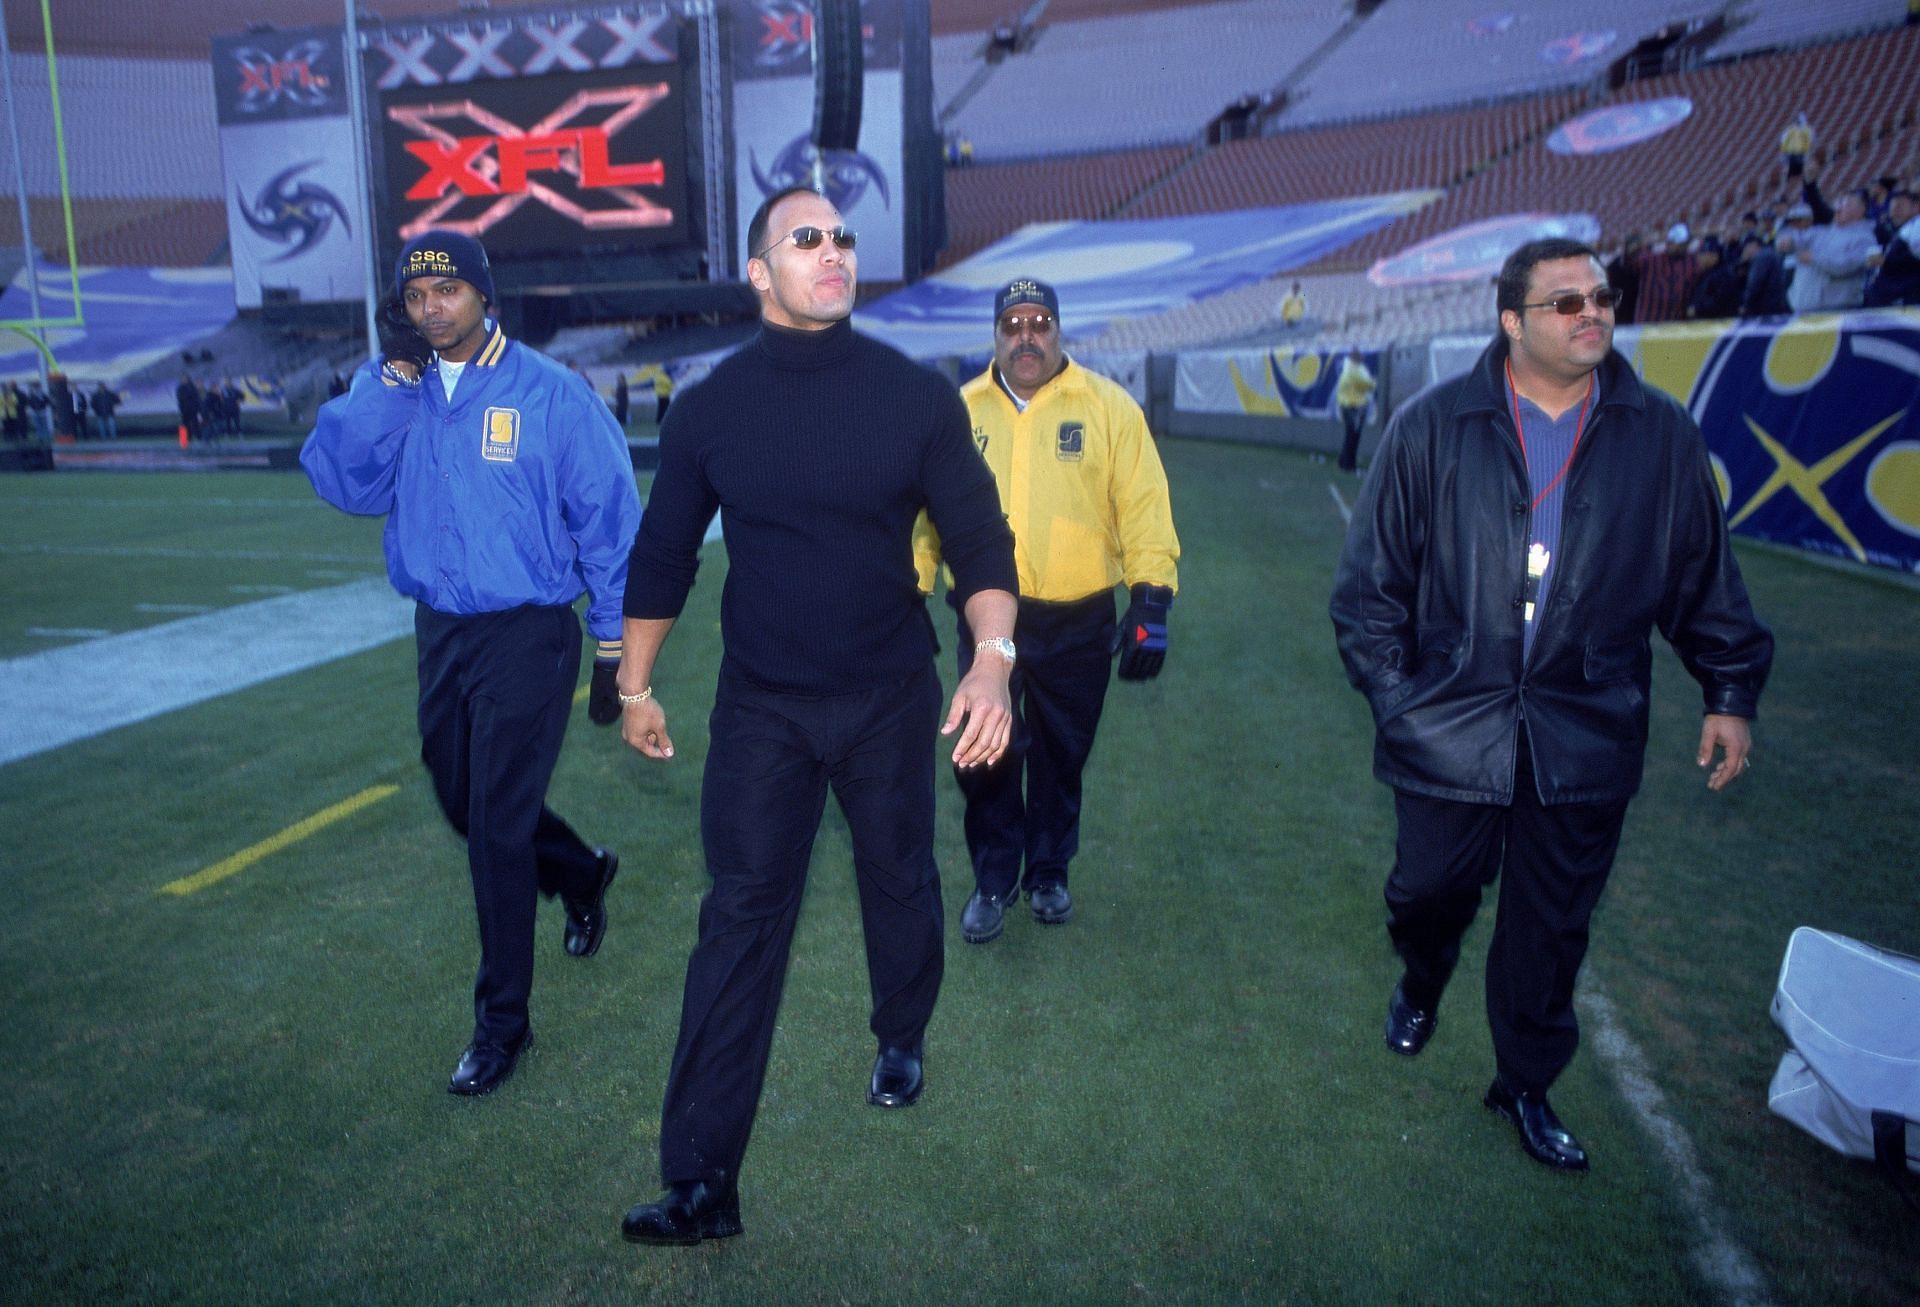 &quot;The Rock&quot; in 2001 attending an XFL game